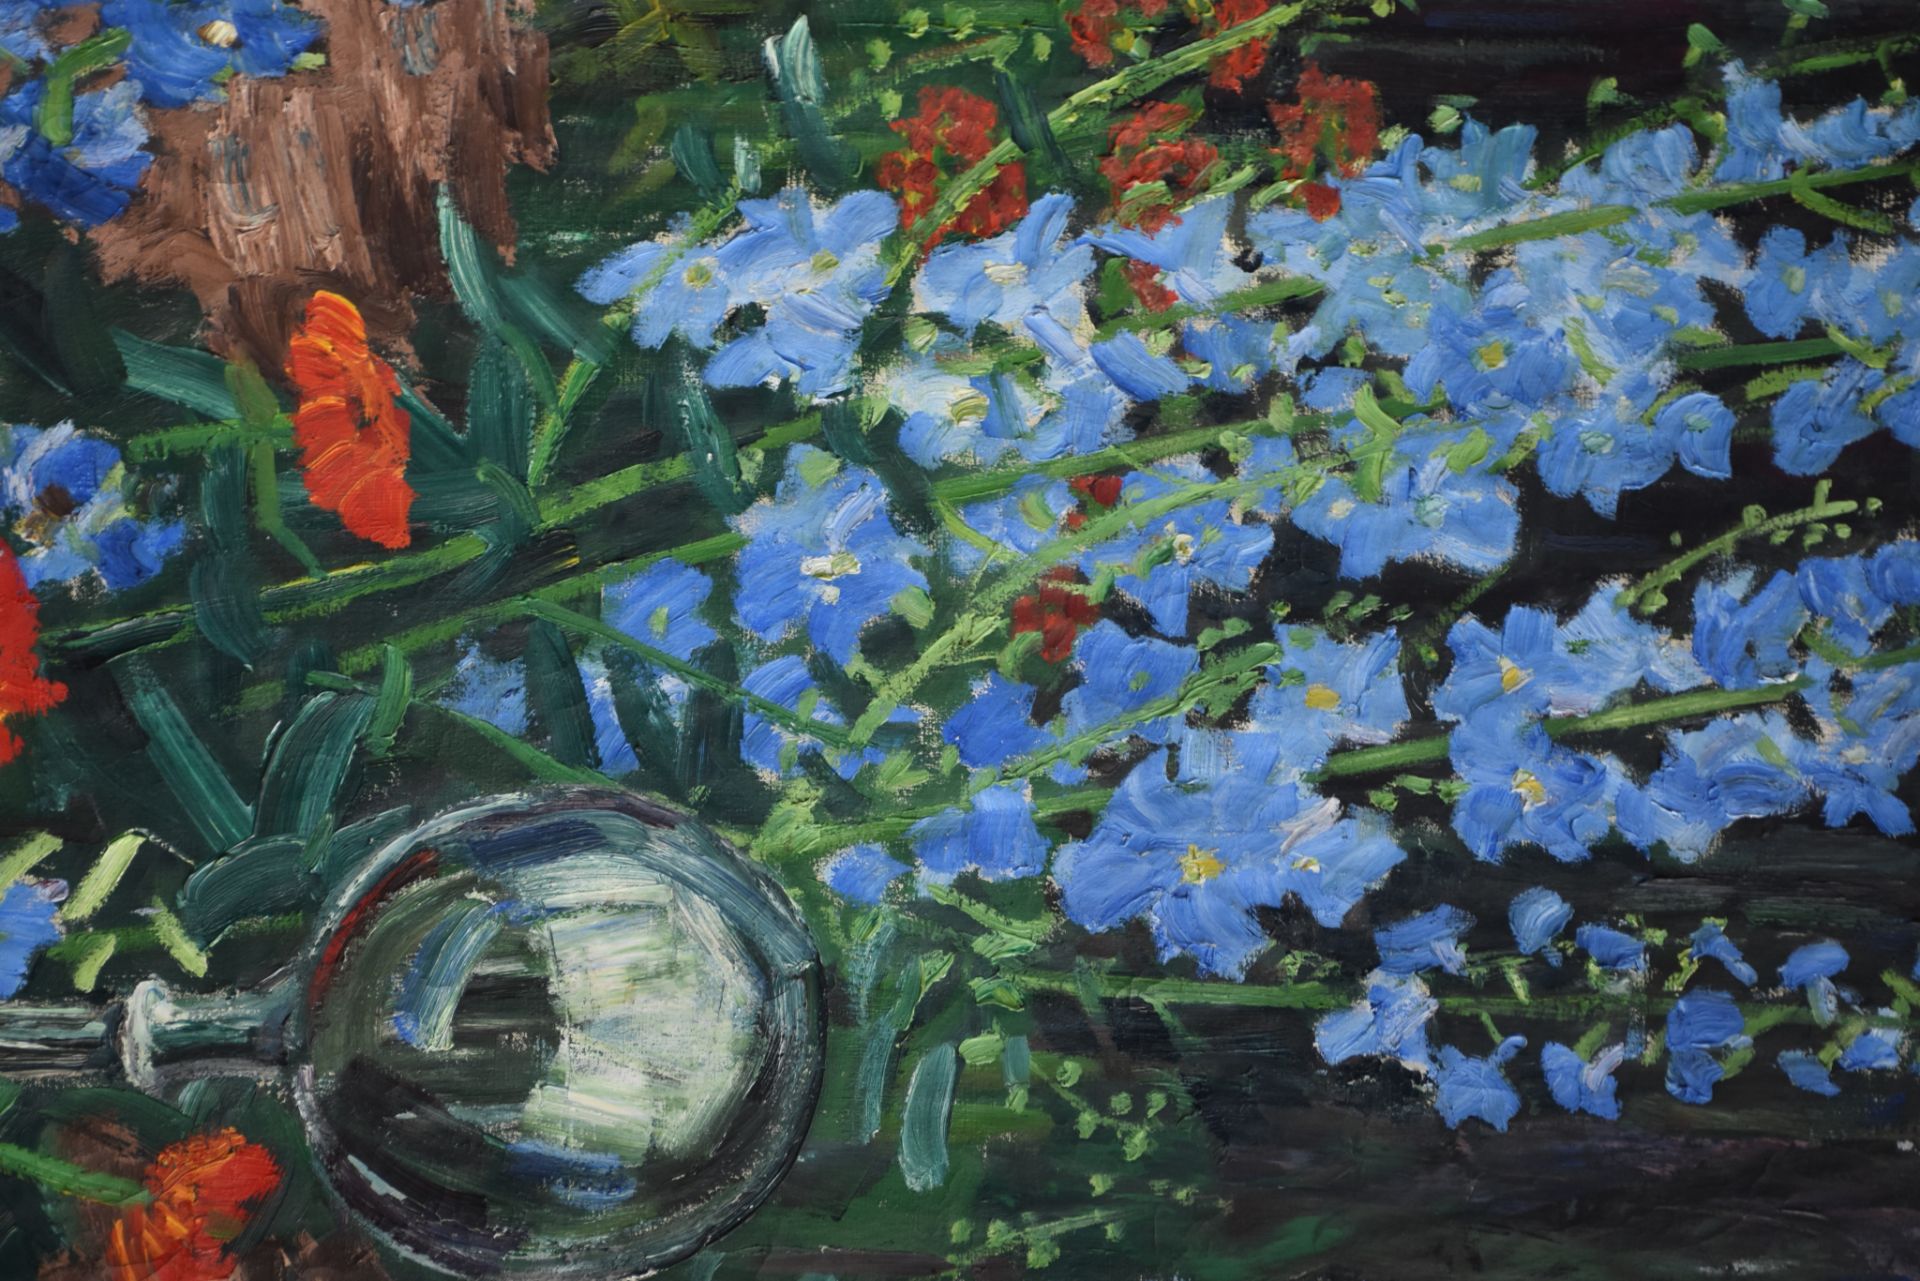 Arnold BALWE (1898-1983) Oil on canvas. The delphiniums at the entrance of the garden. Resale rights - Image 2 of 4